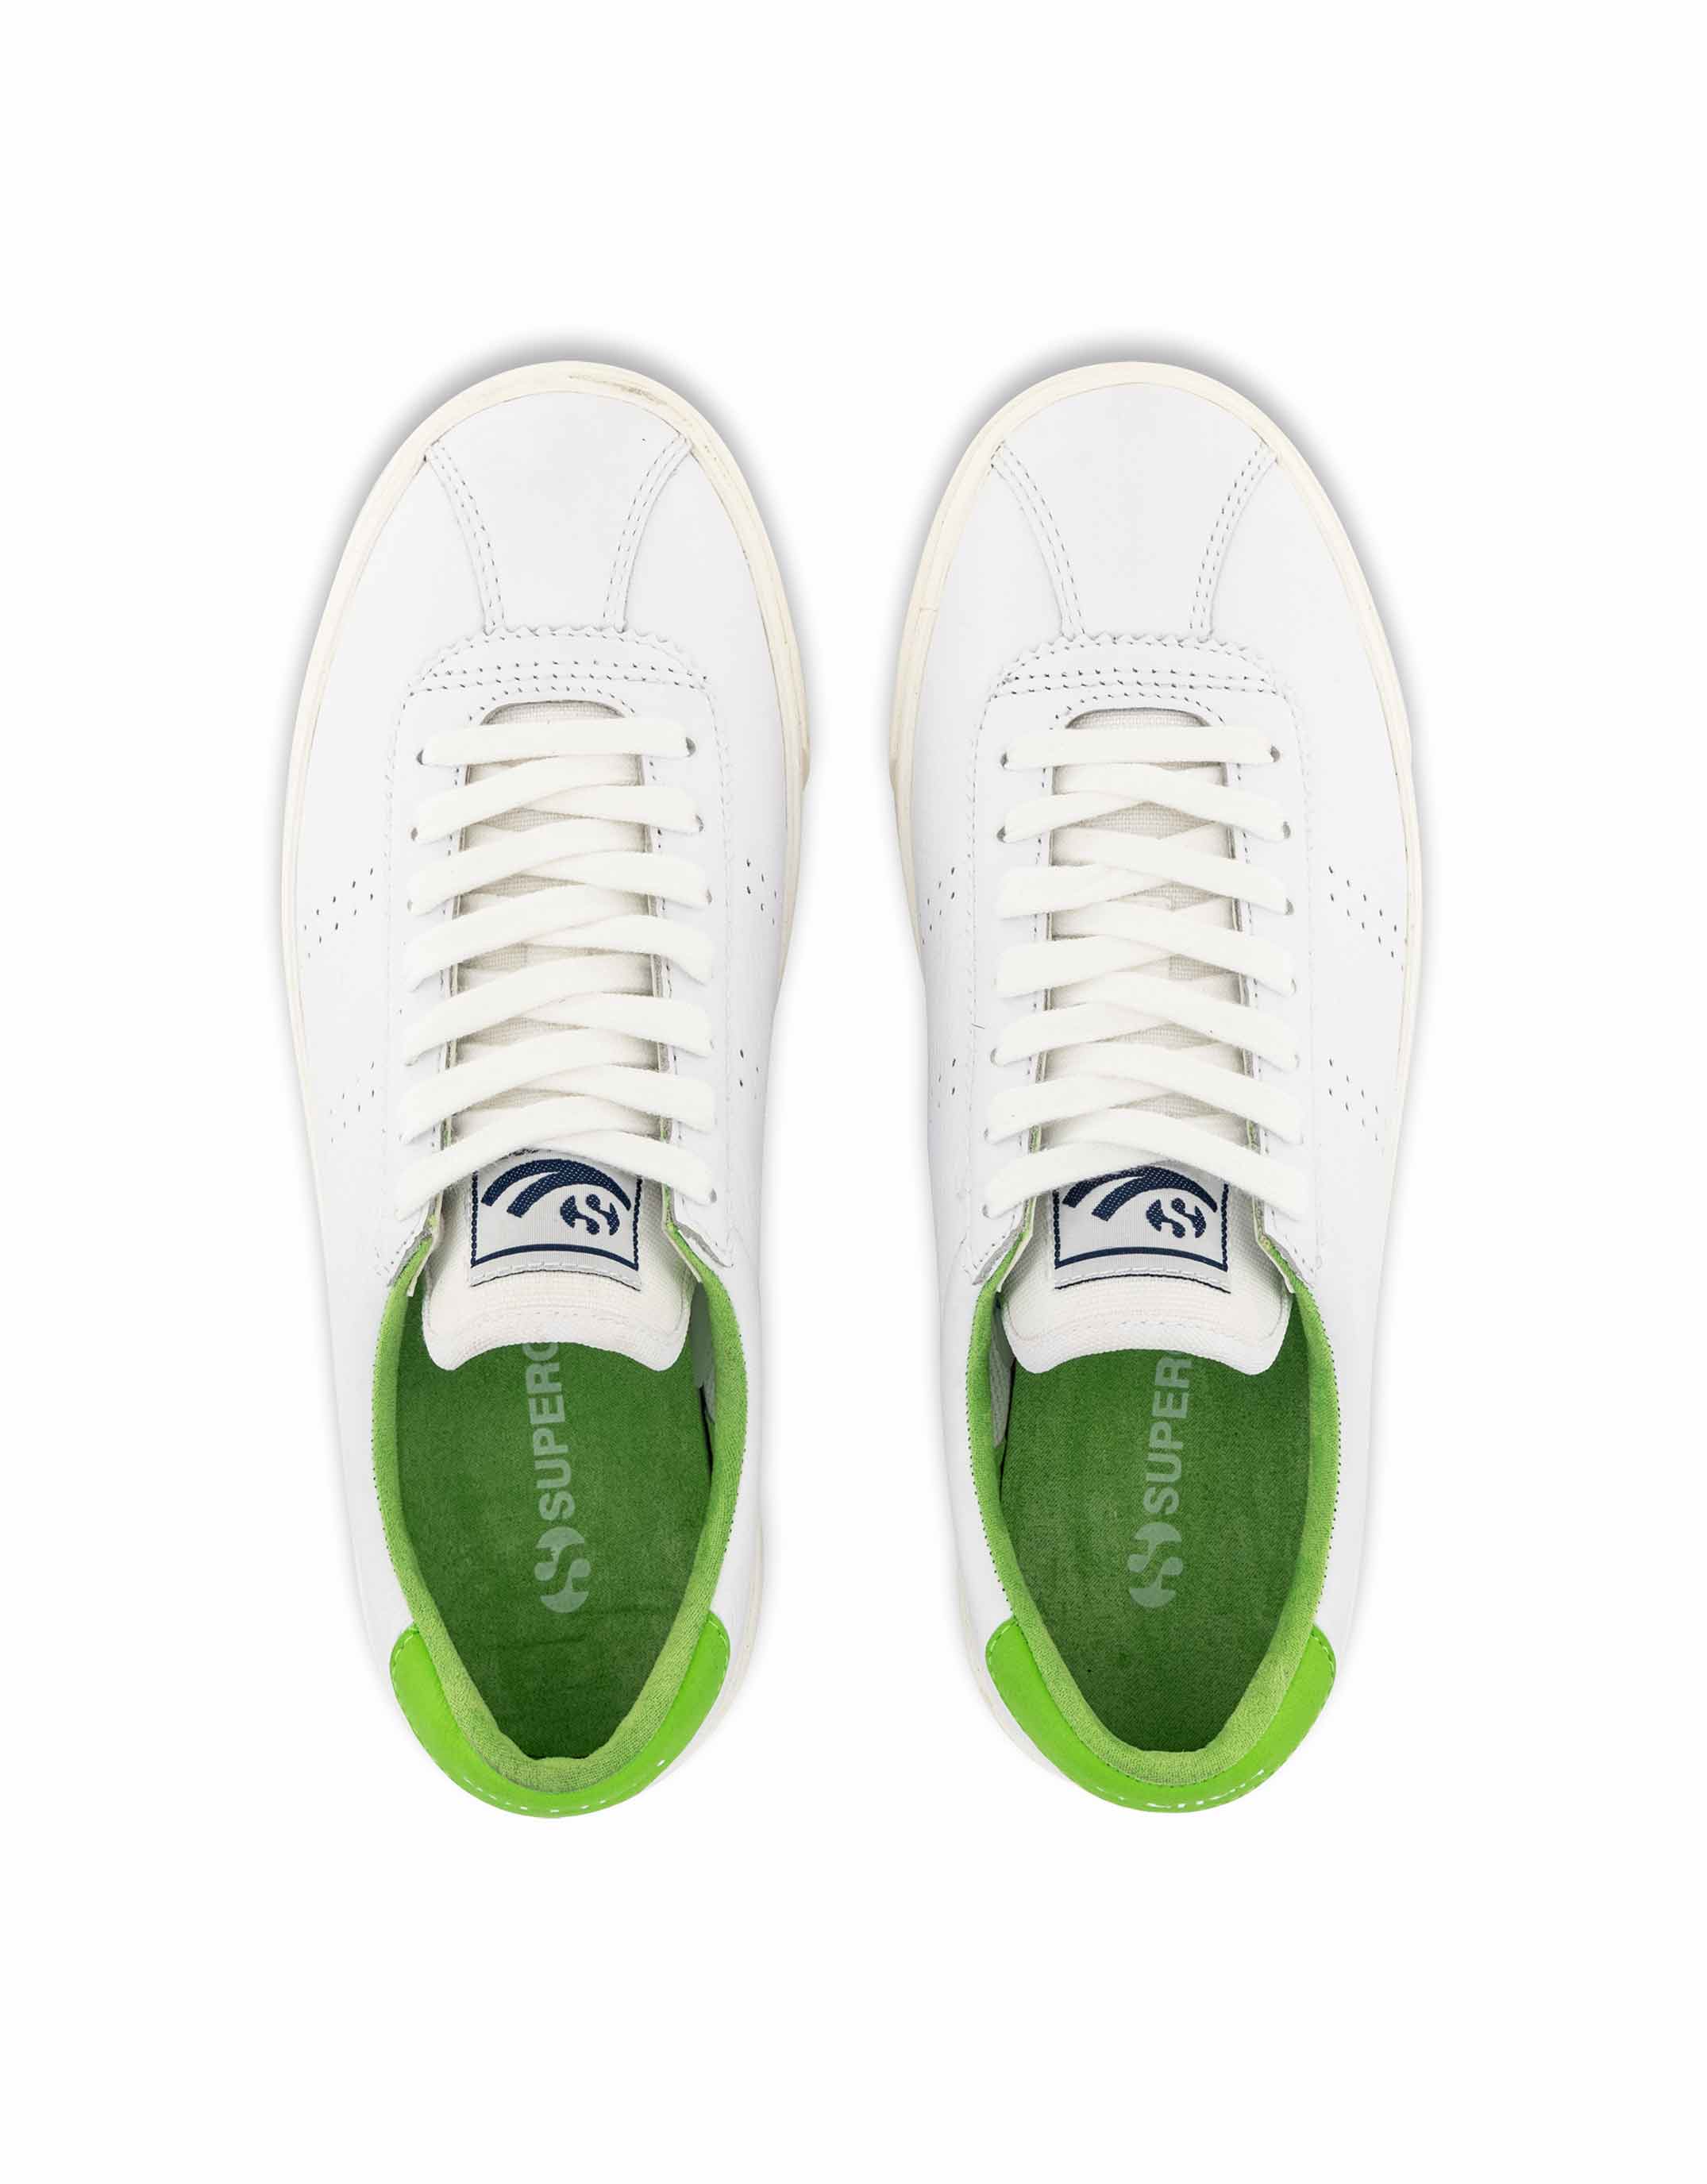 Superga Leather Sneakers - 2843 Club S Leather Sneaker - White/Green Flash